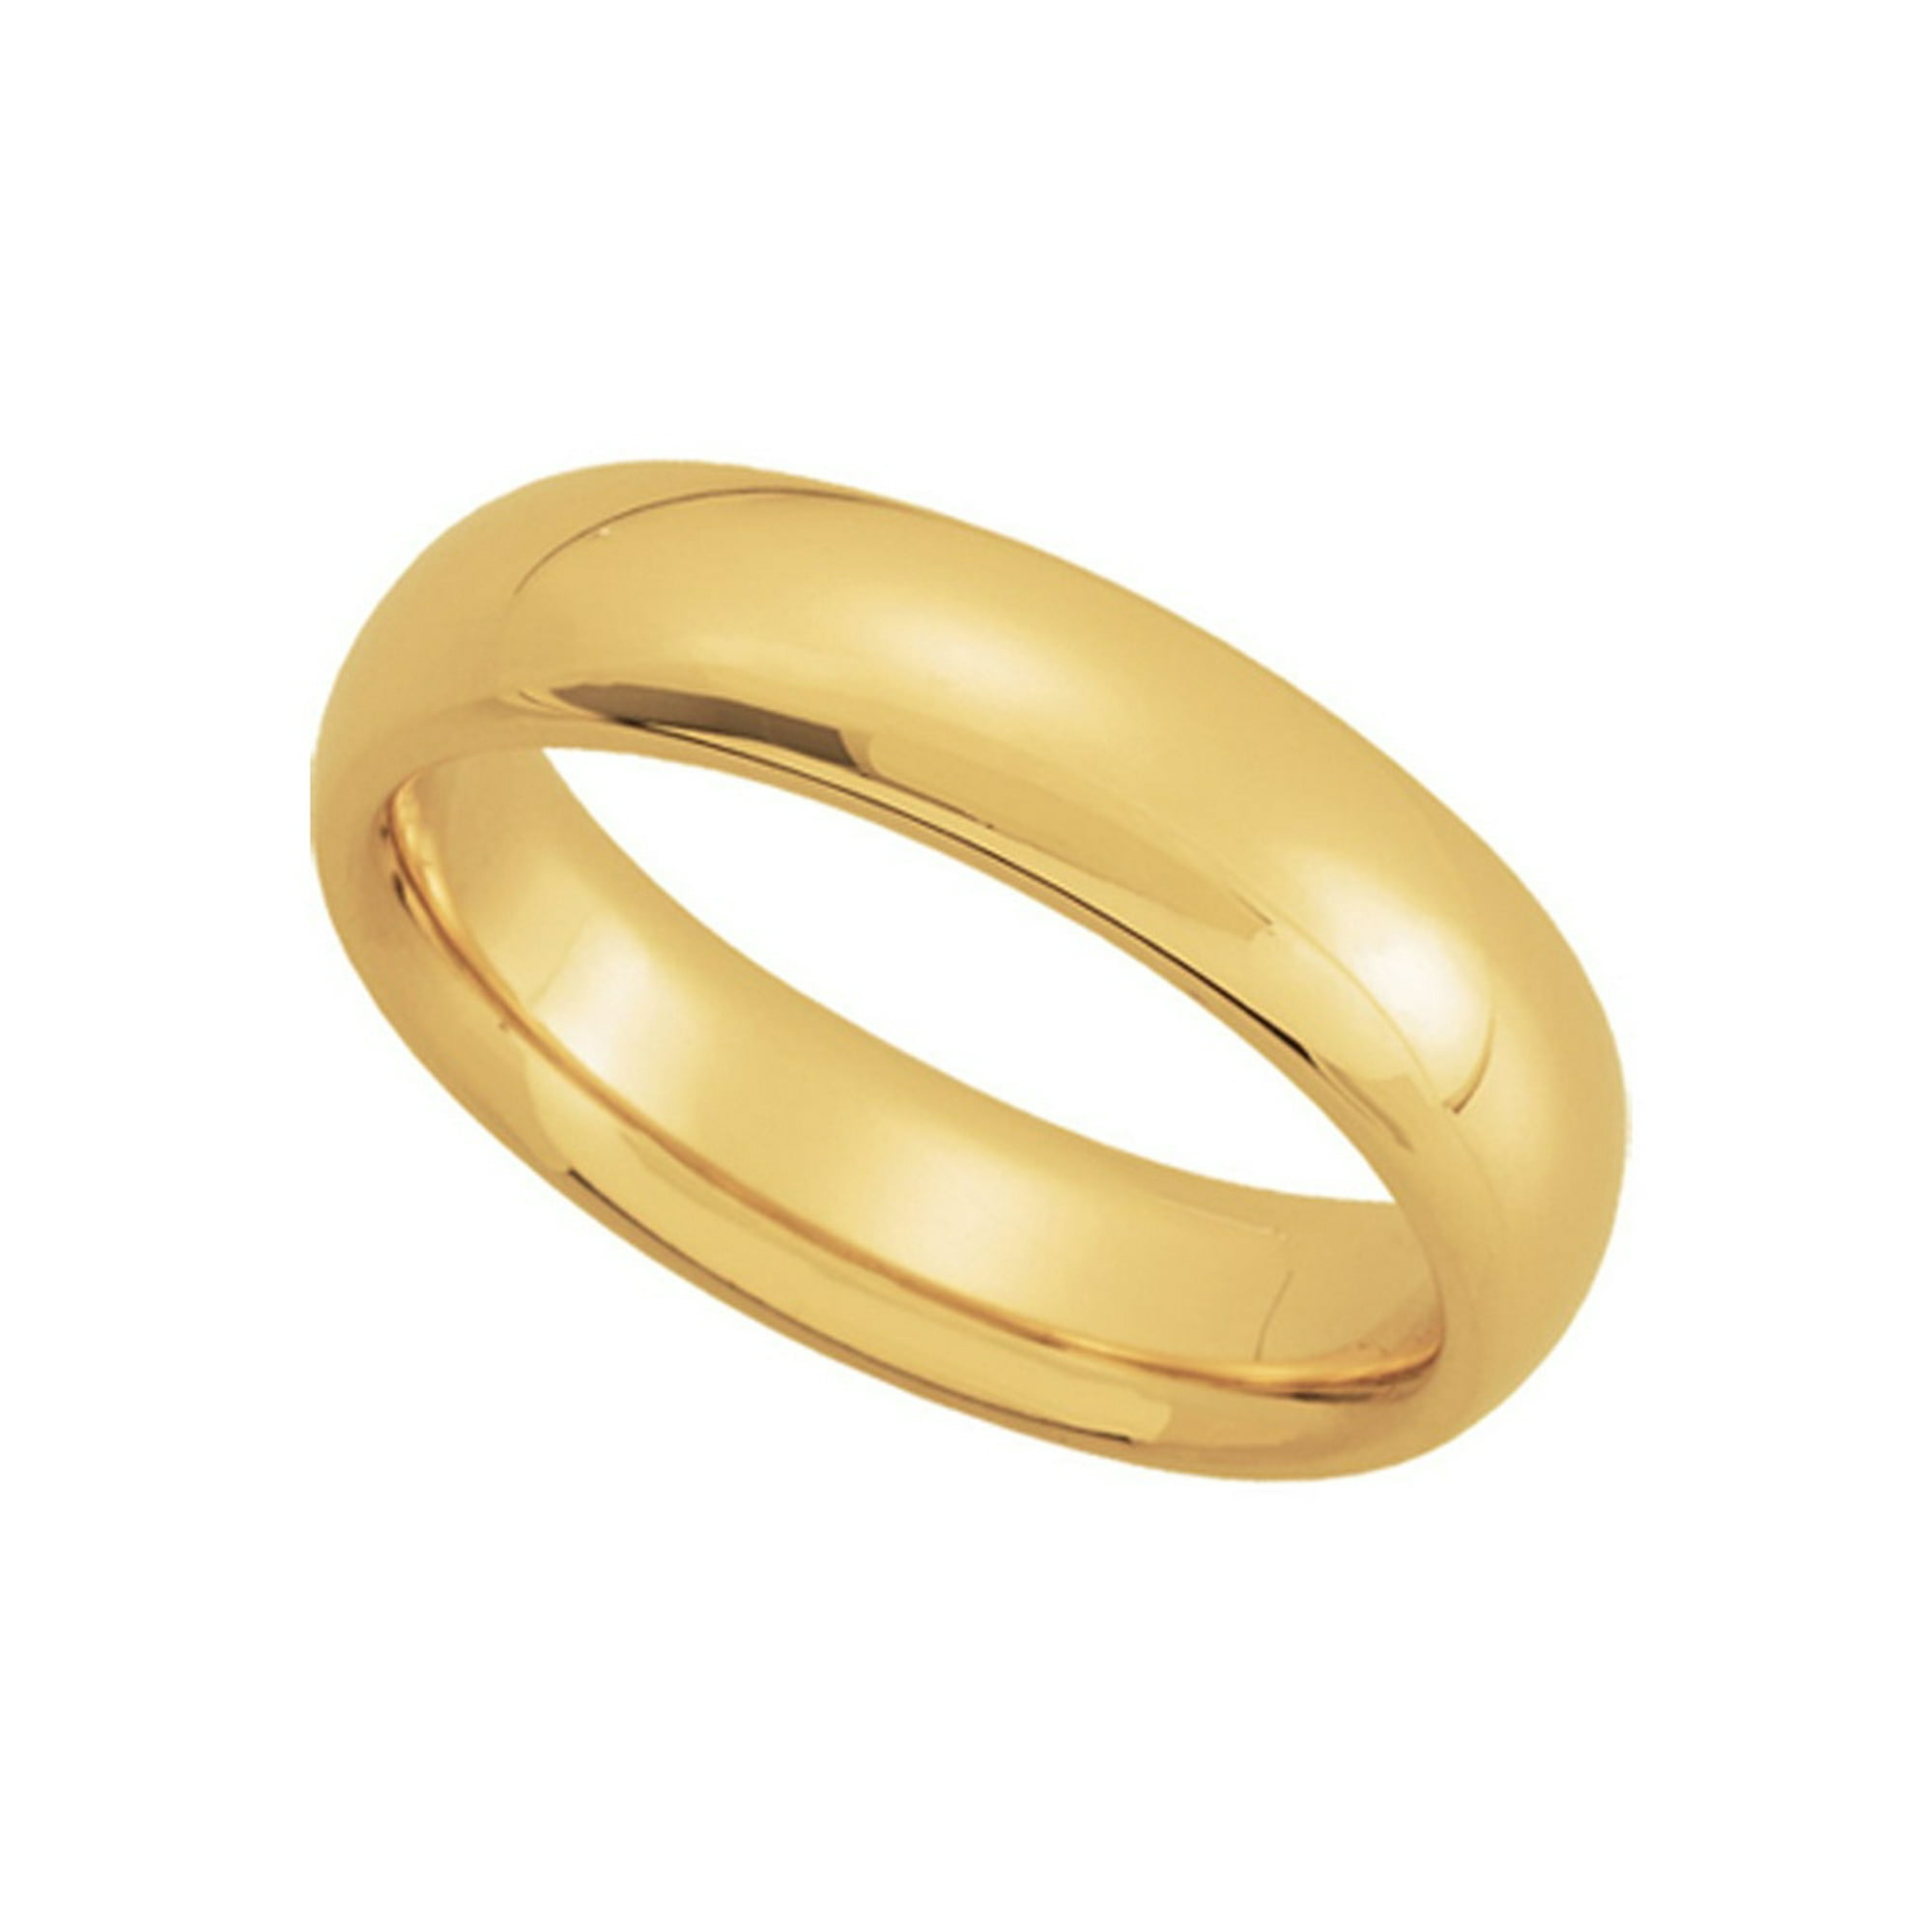 Five Star Jewelry - Domed Wedding Band Comfort Fit 10K LV American Contemporary Yellow Gold